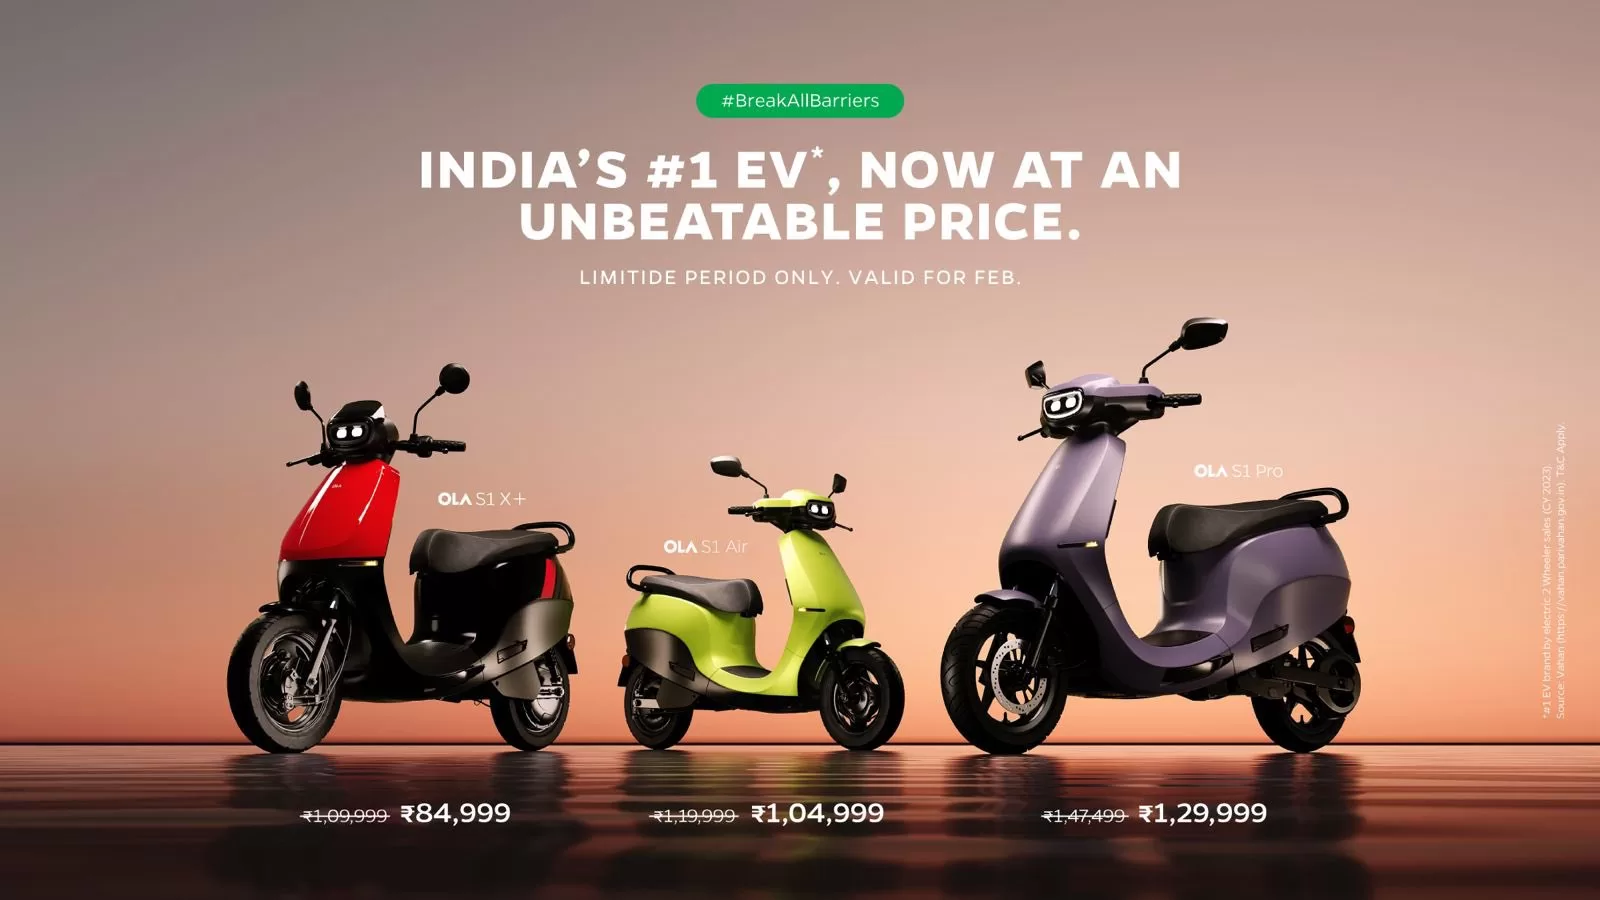 Ola Electric Offers Rs. 25,000 Discount on Valentine's Day